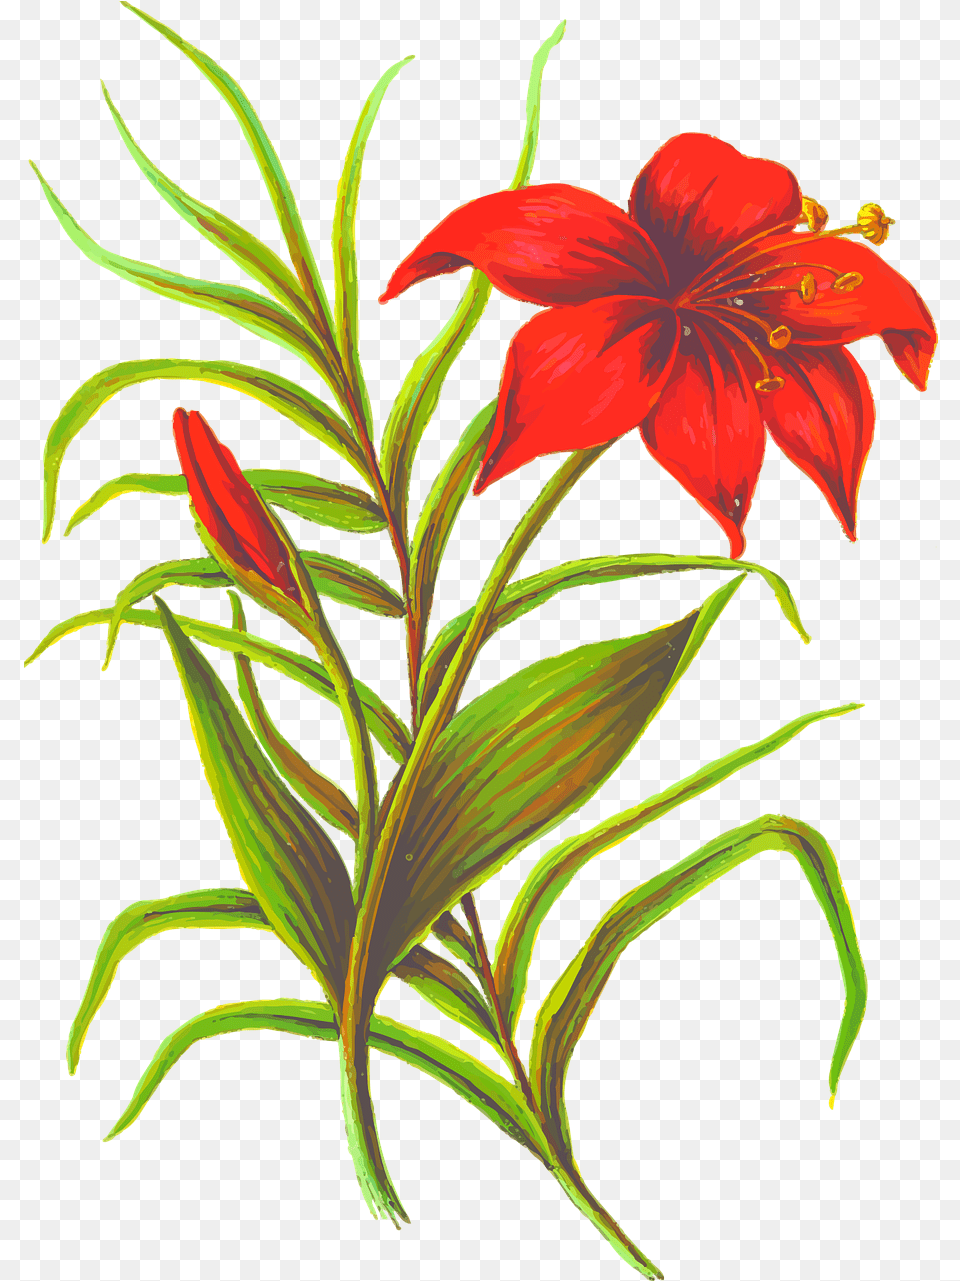 The Best Drawings Of Wild Flowers 23 Ideas Howtodraw In Flower Leaf, Plant, Lily Free Transparent Png